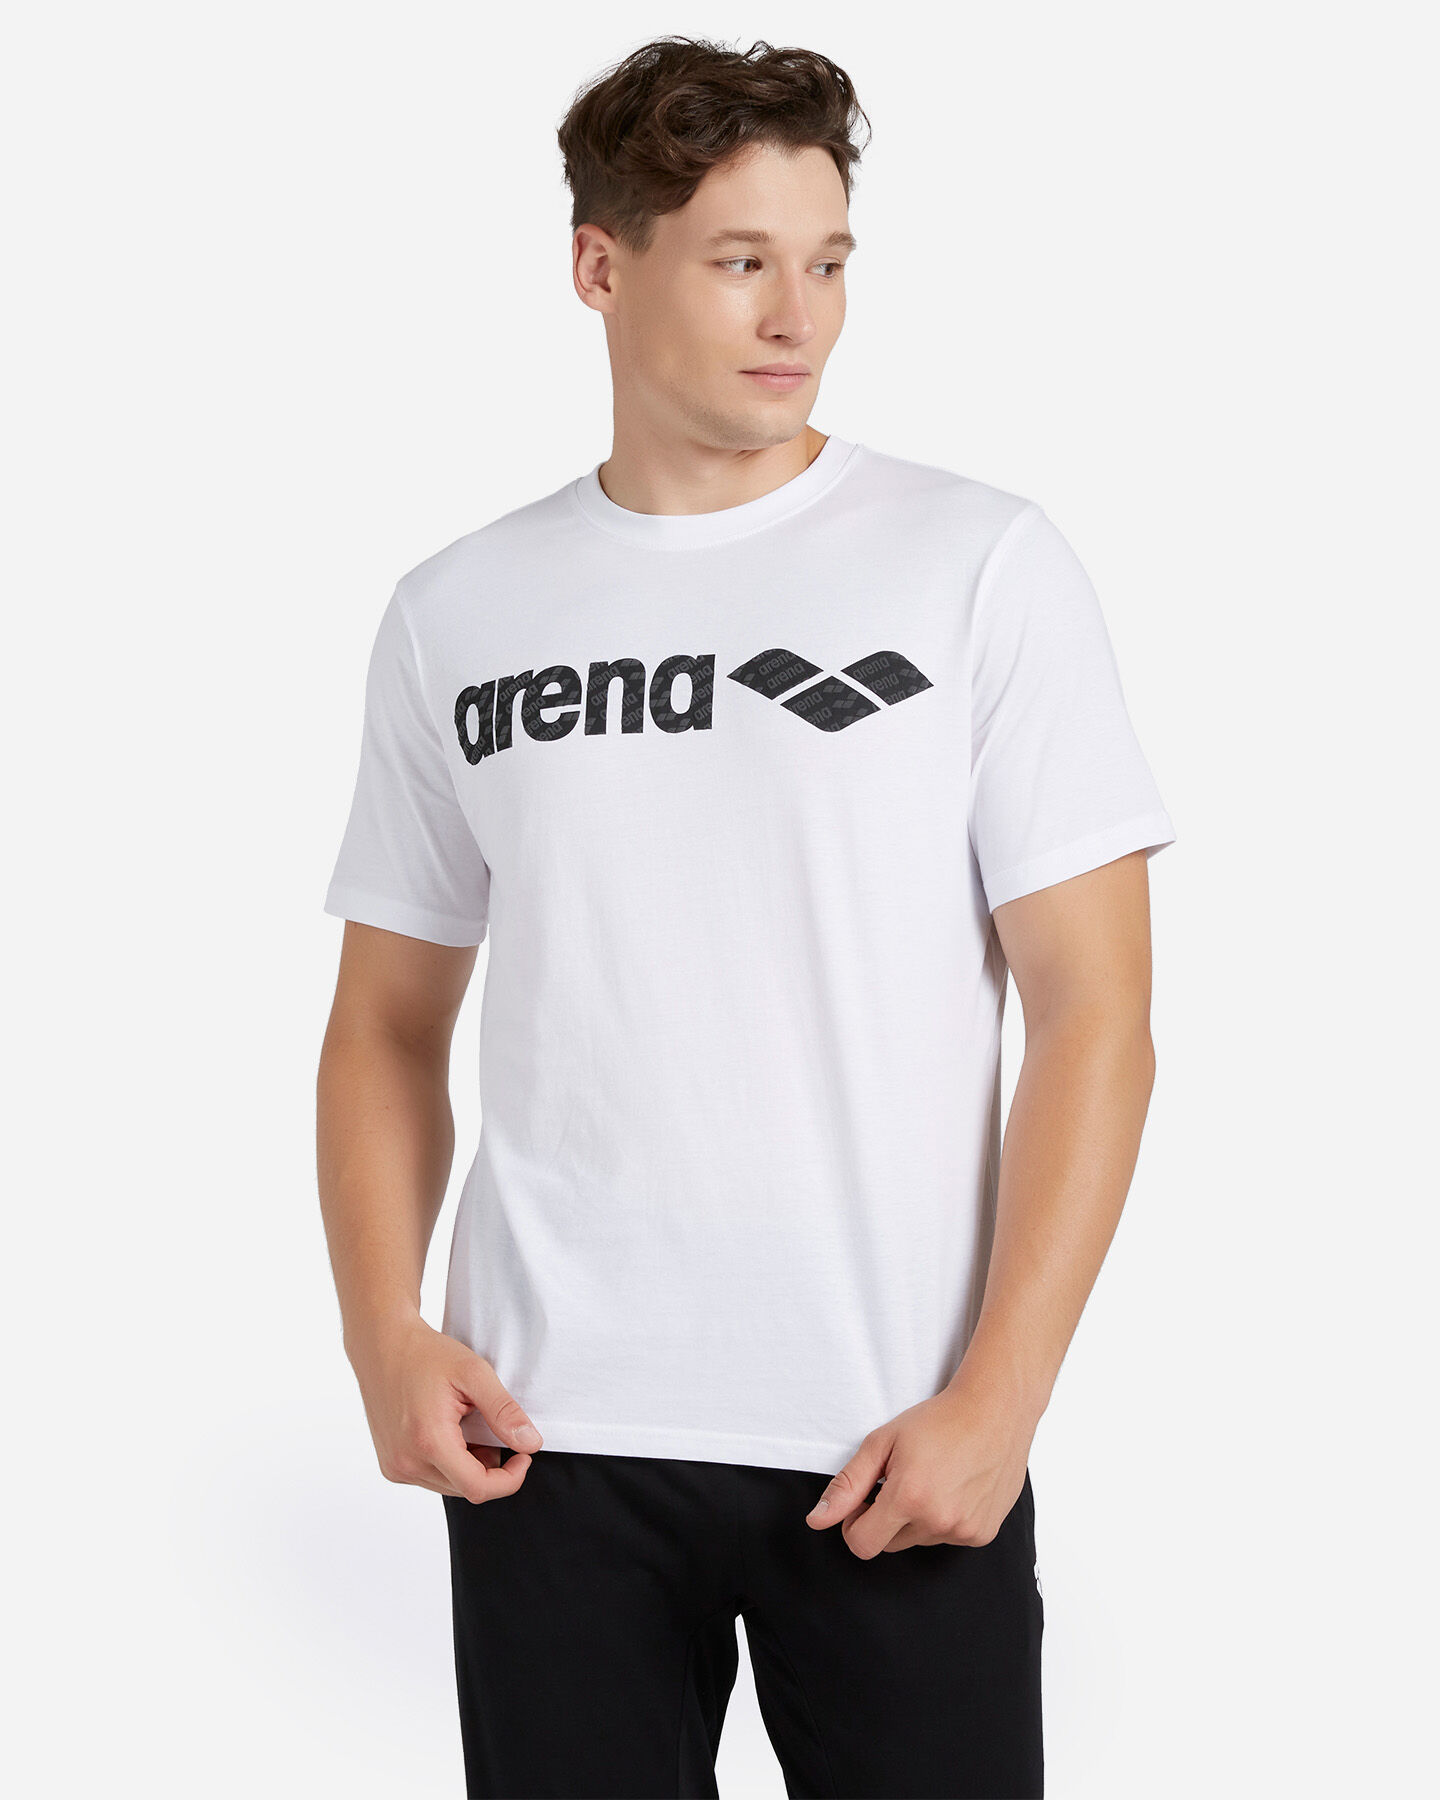  T-Shirt ARENA BIG LOGO LINEAR M S4093138|001|S scatto 0